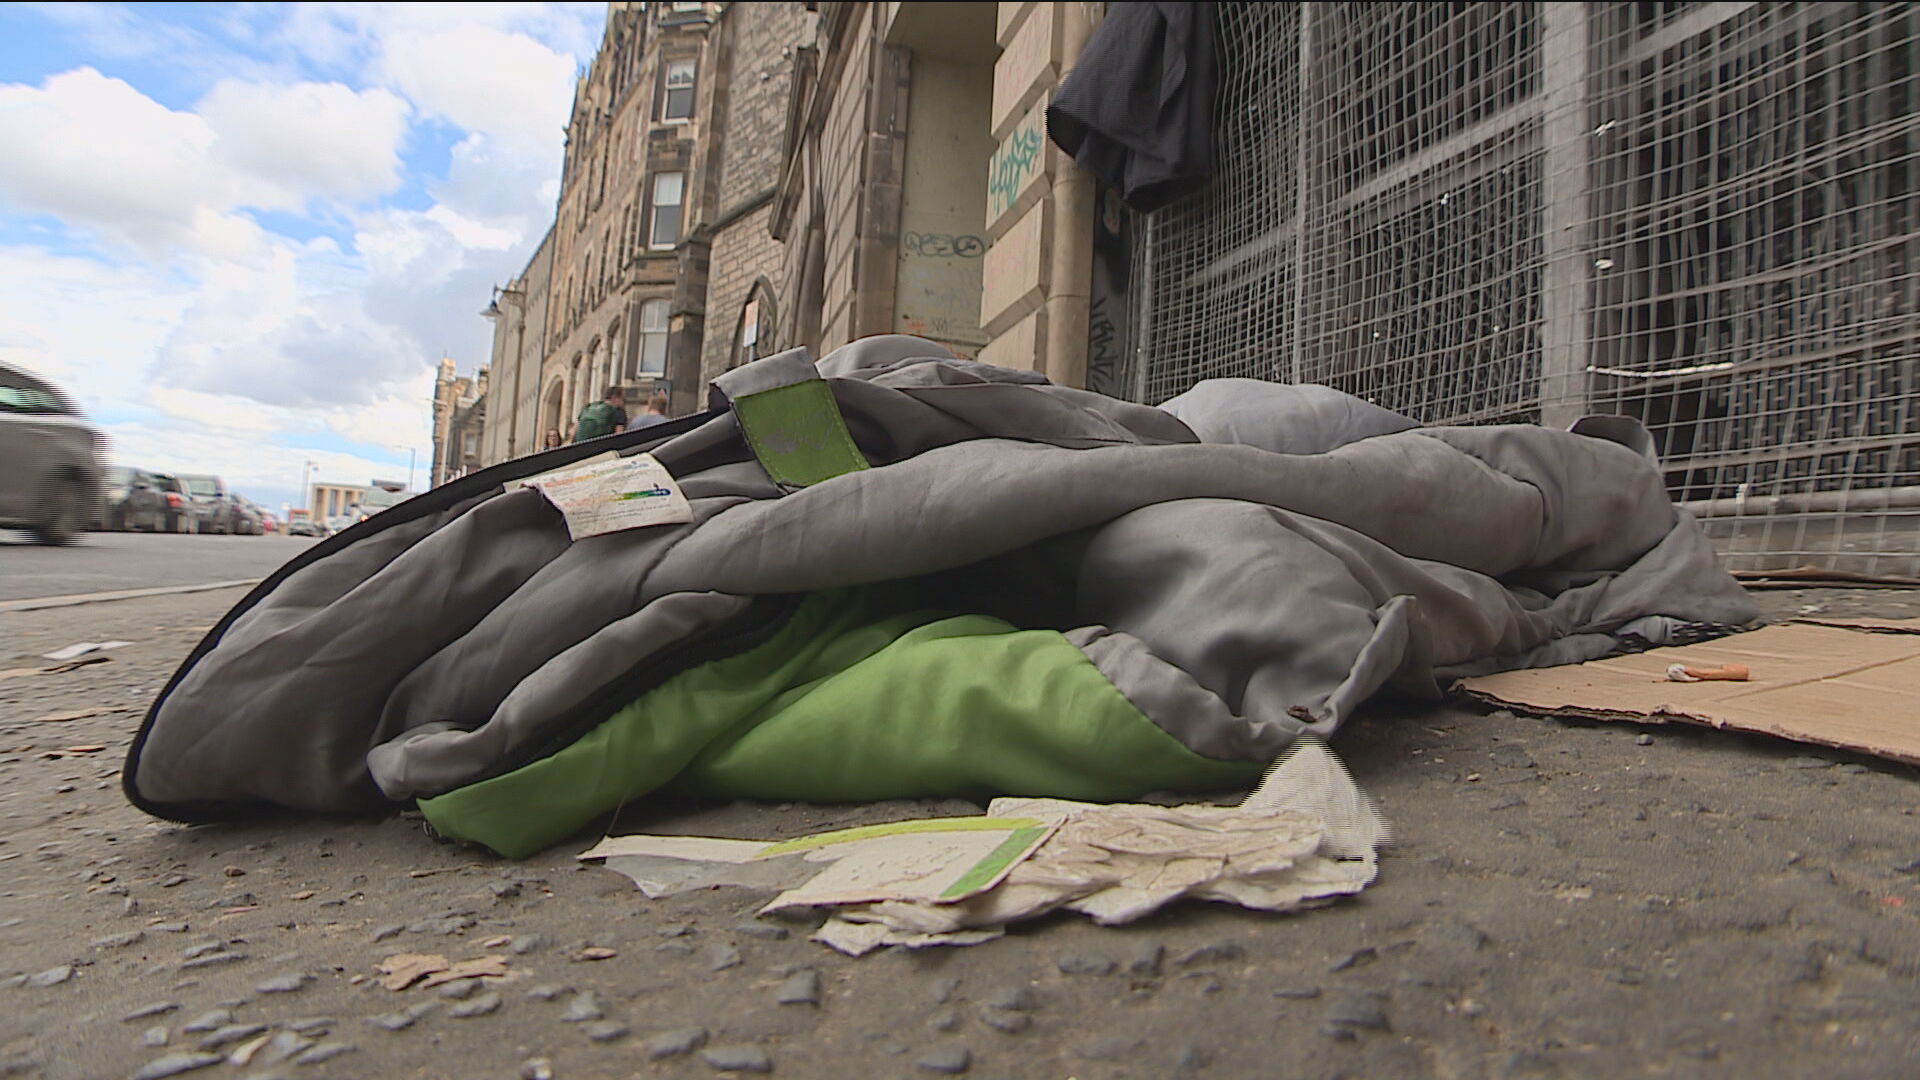 Labour criticised Glasgow City Council over the care it provides to homeless people.